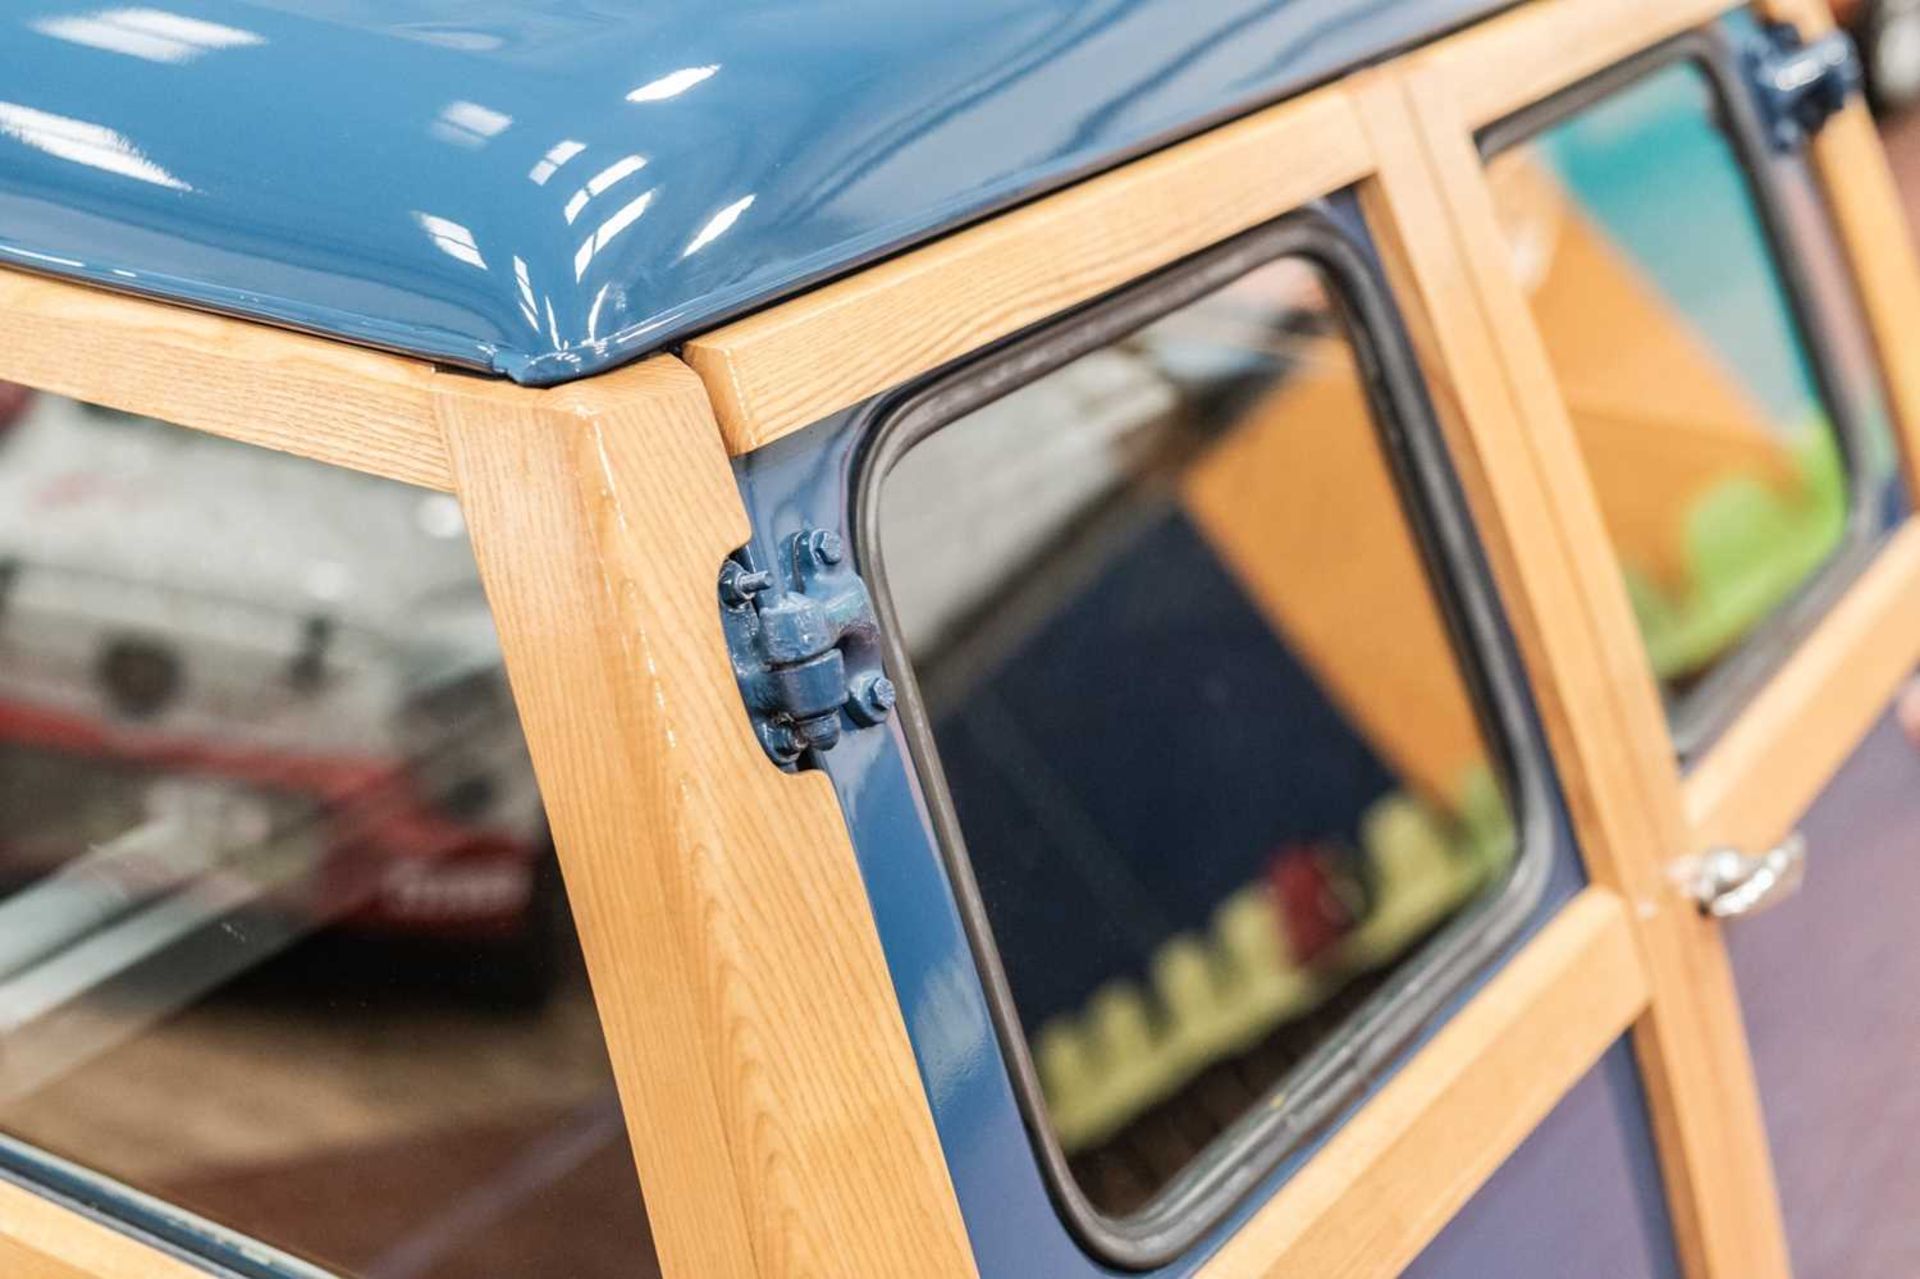 1970 Austin Mini Countryman Fully restored to concourse standard - Image 38 of 43